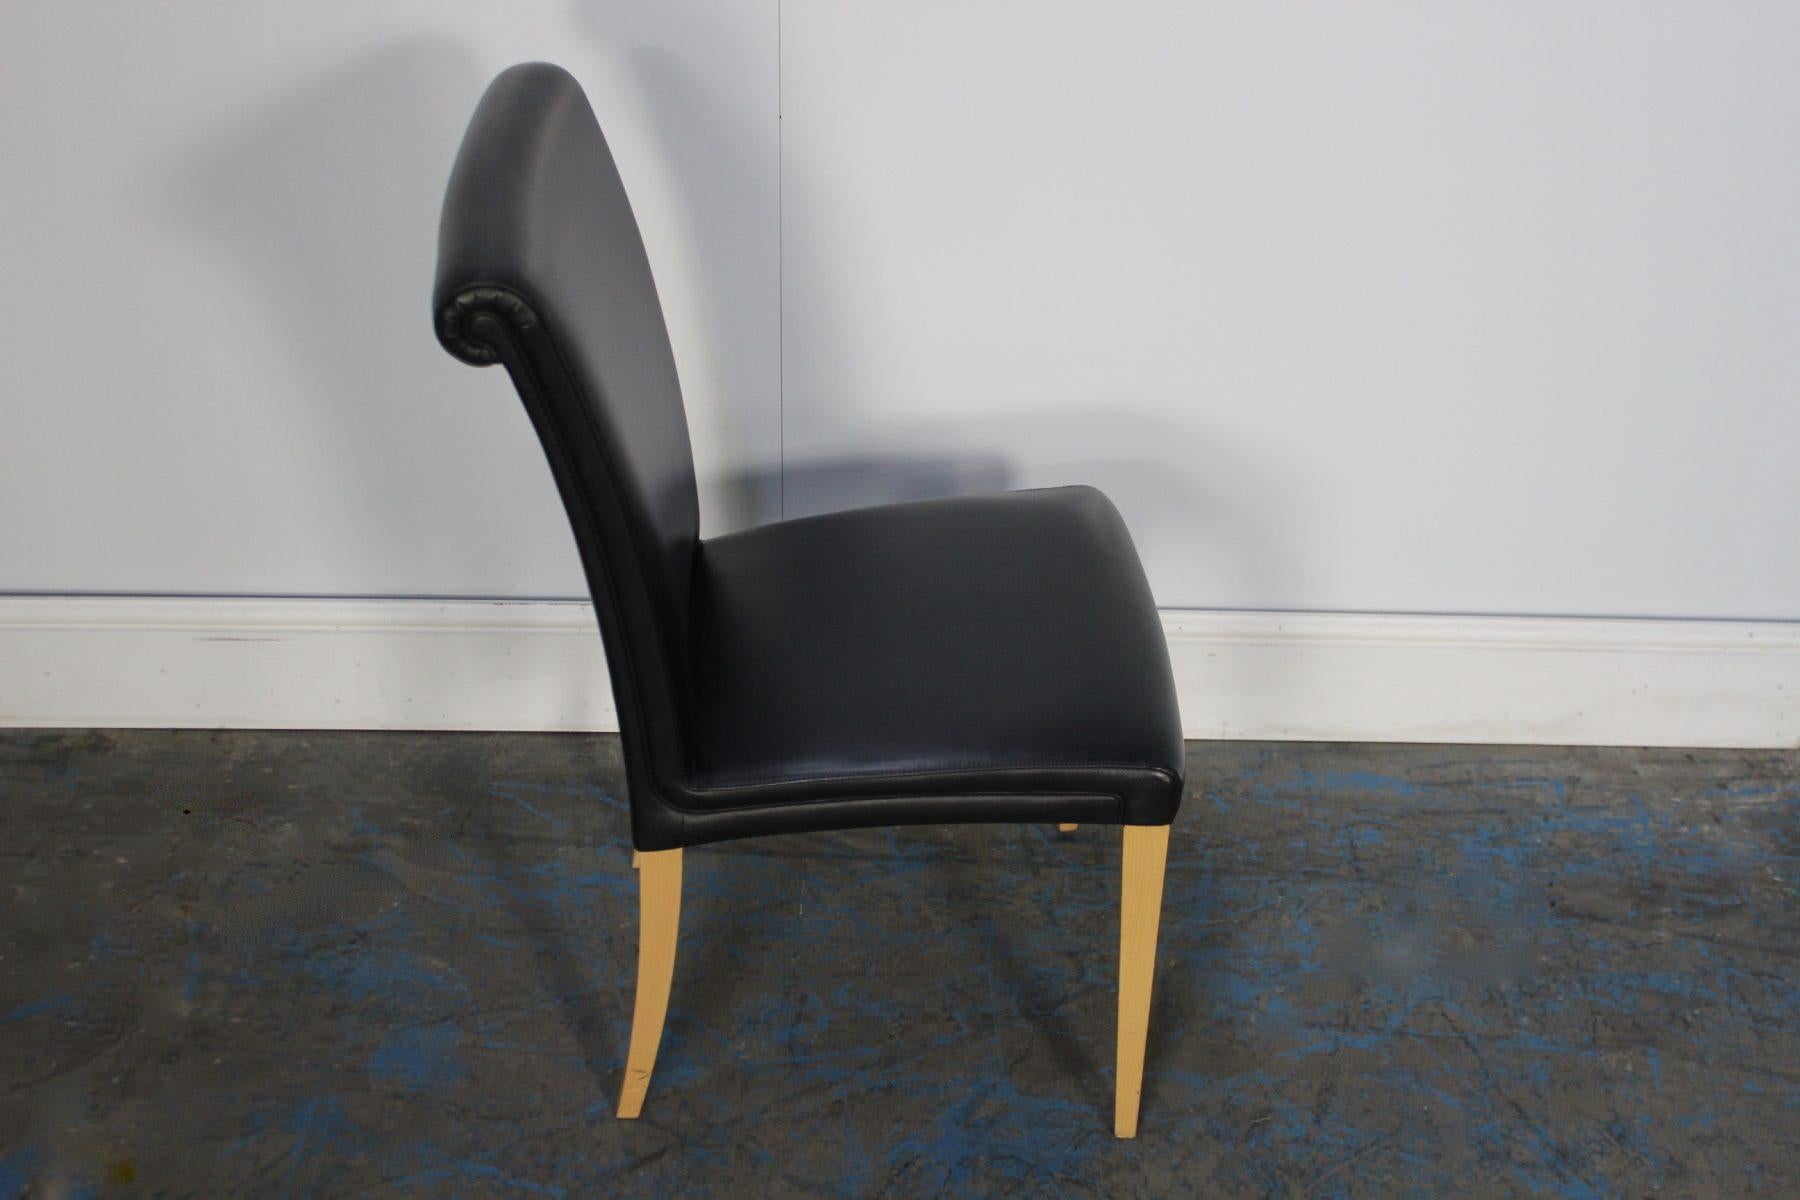 Superb Suite of 12 Poltrona Frau “Vittoria” Dining Chairs in Black “Pelle Frau” For Sale 1